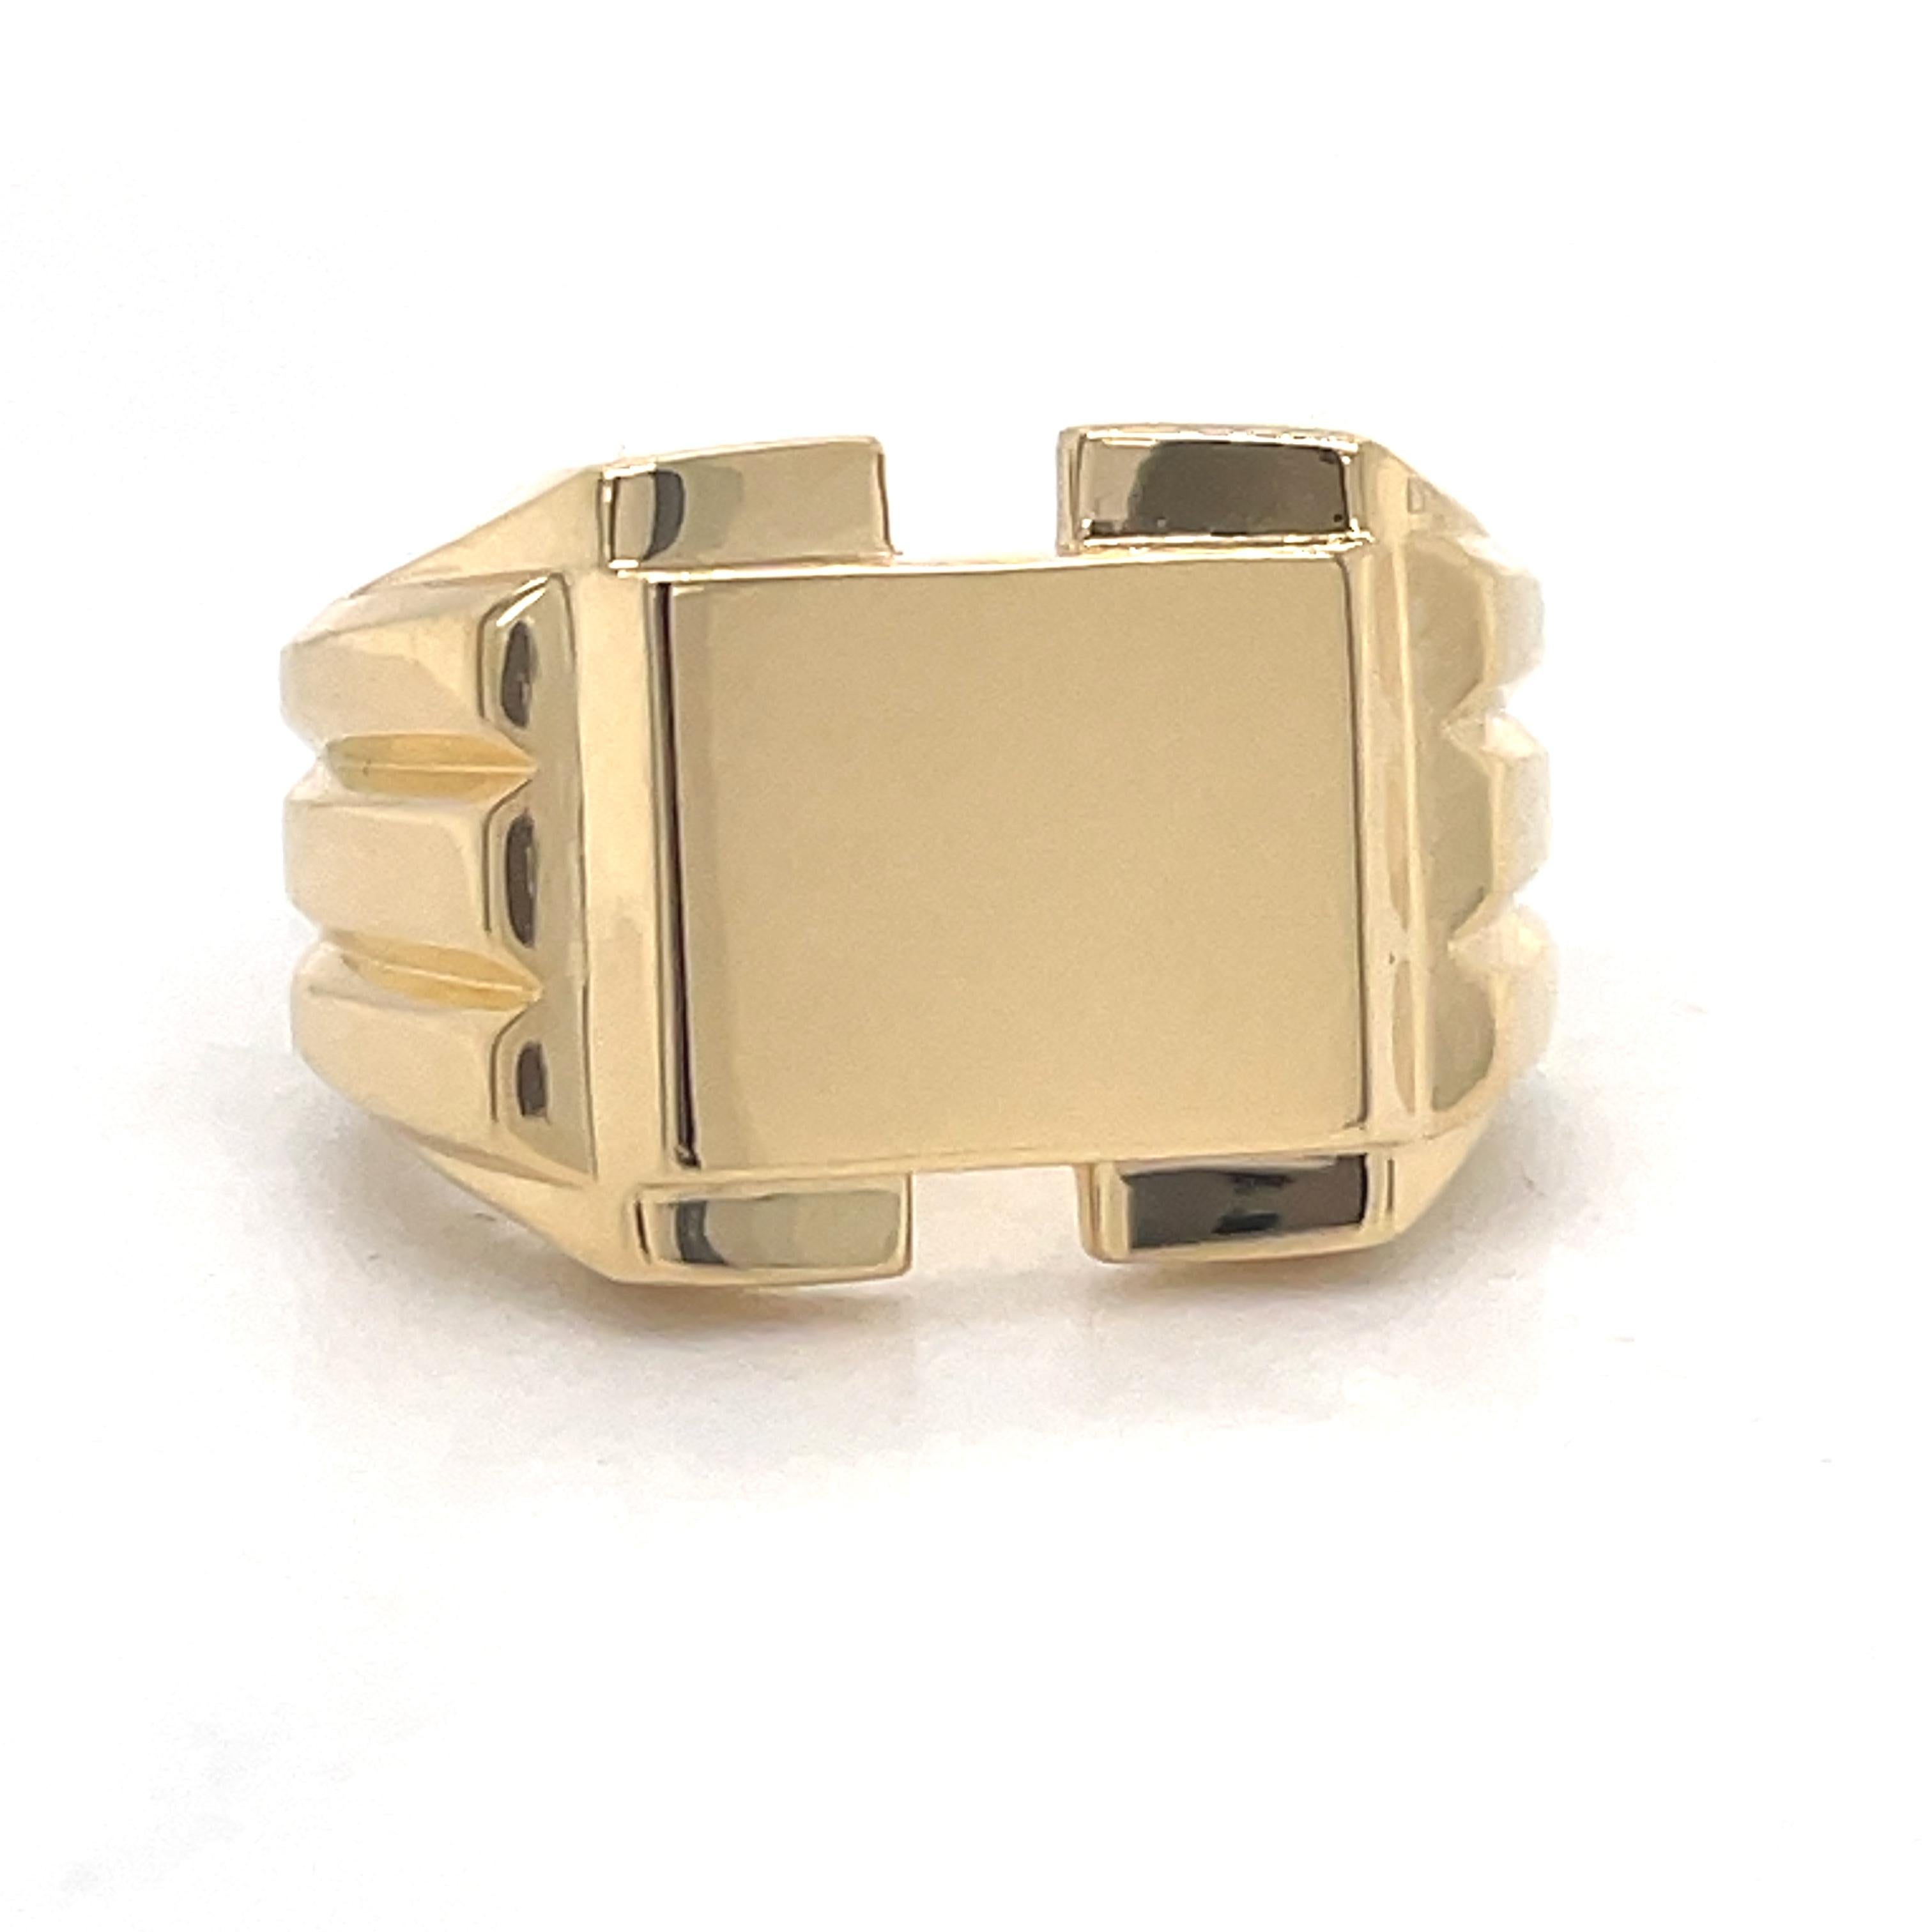 Unisex Gold Signet Ring, Vintage Style Ring, 14k Yellow Gold, made to order ring For Sale 6